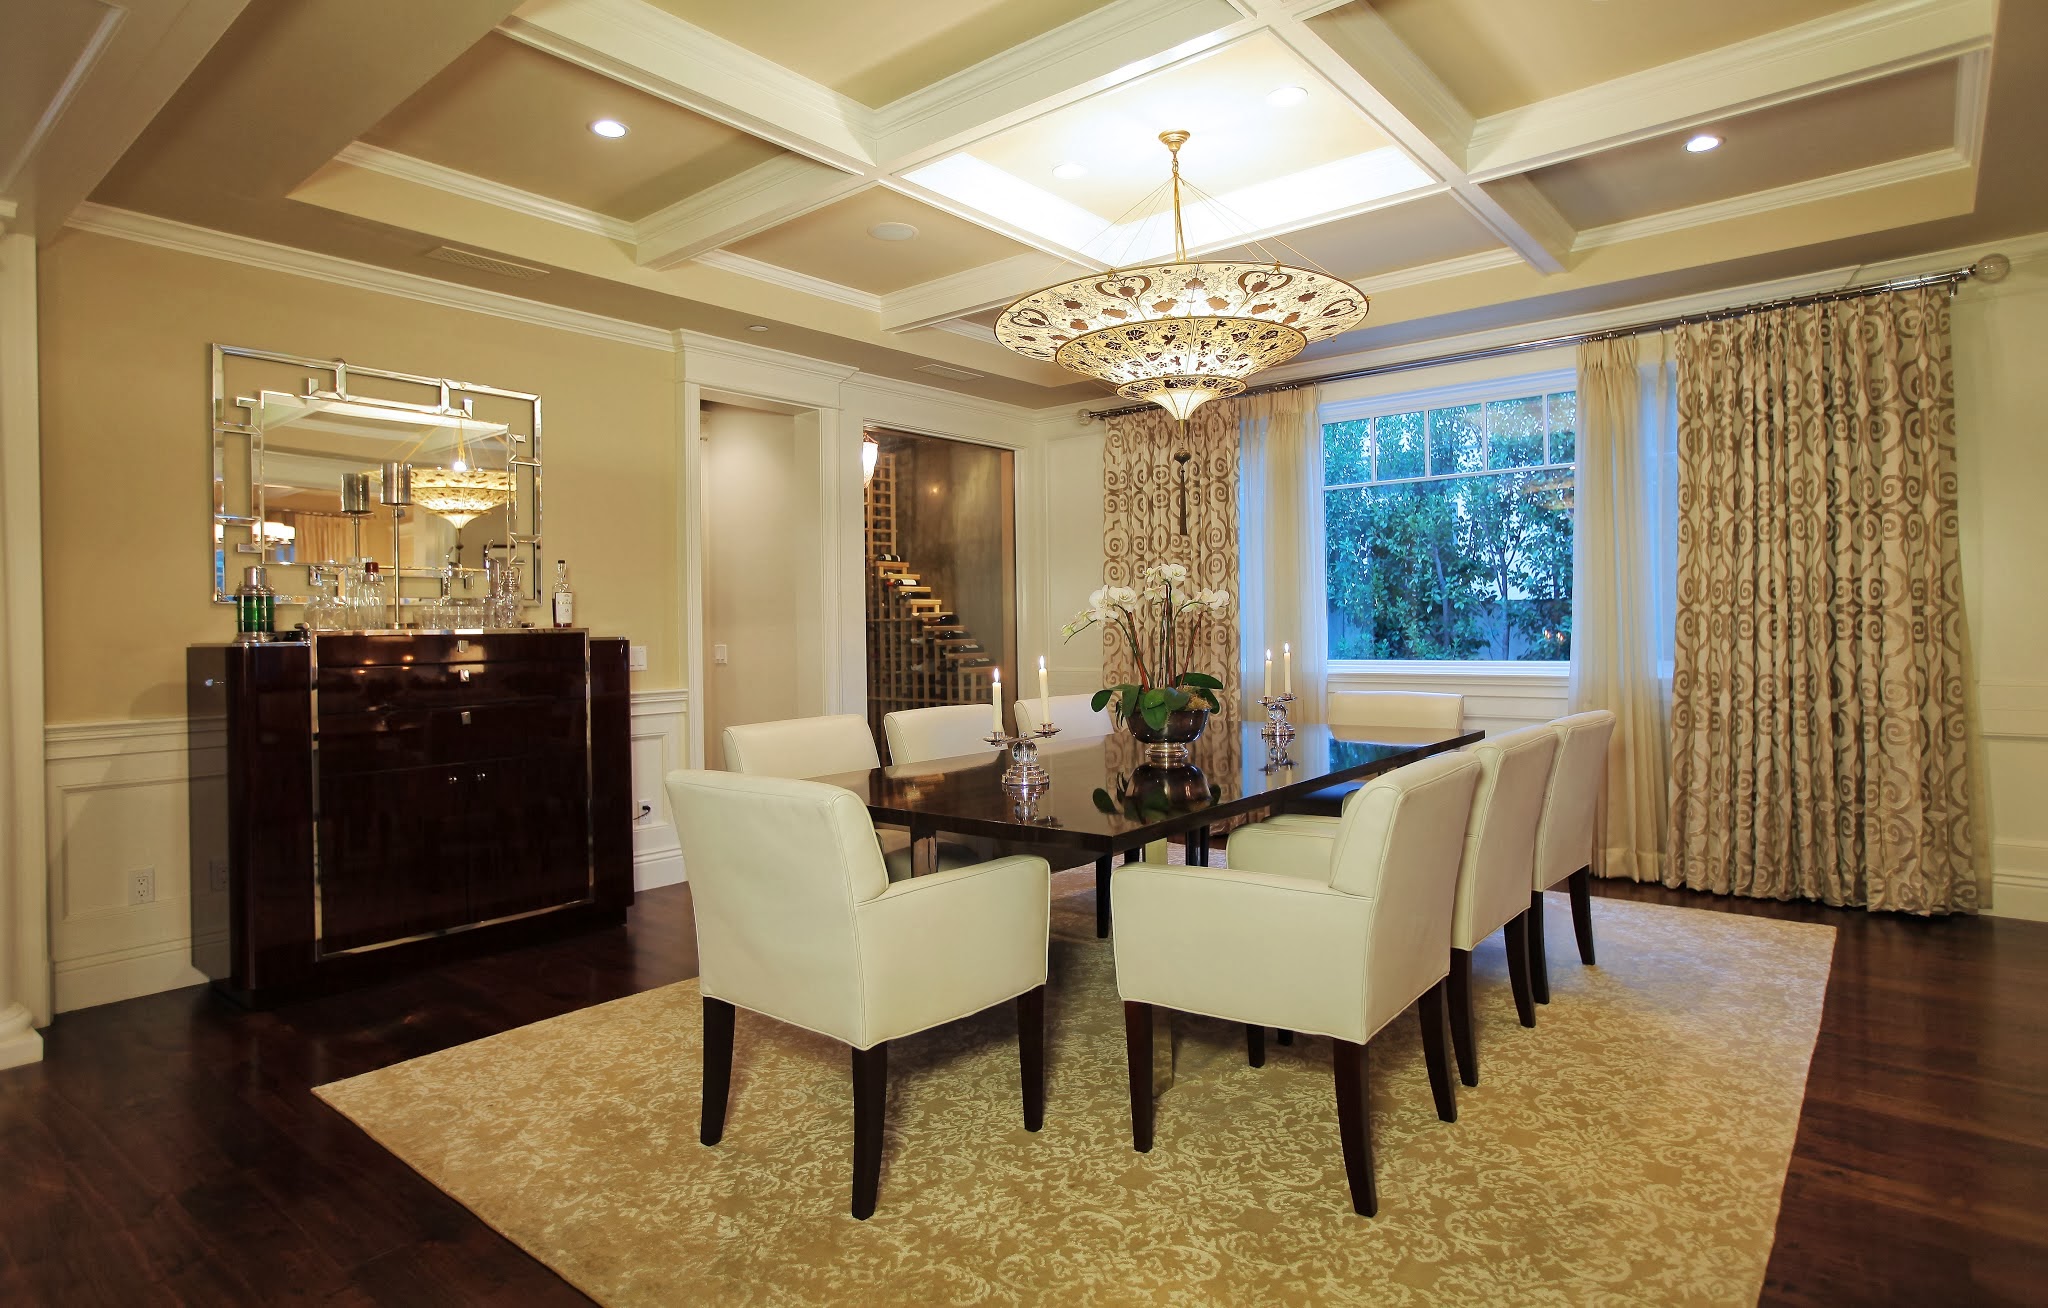 Lighting For Dining Room With High Ceiling